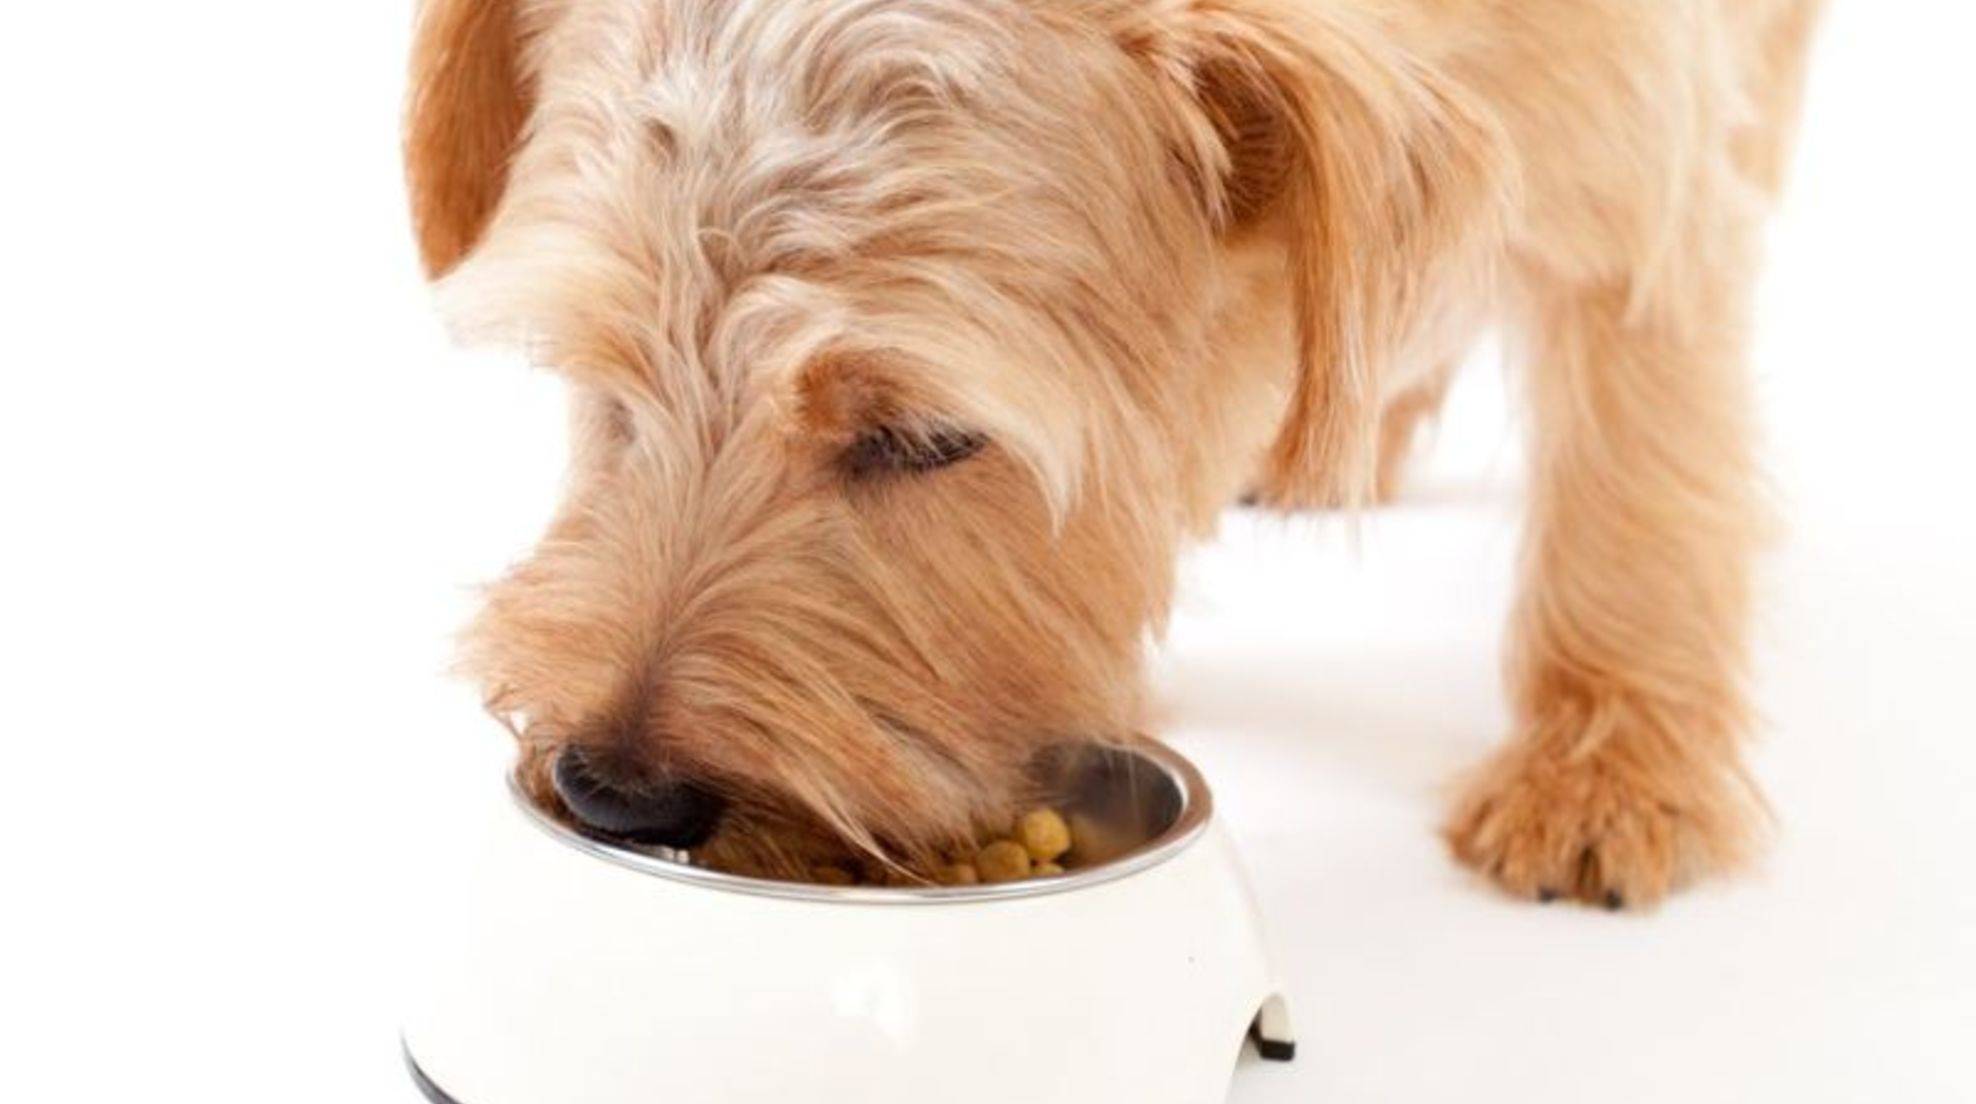 Find a suitable food bowl for the dog.